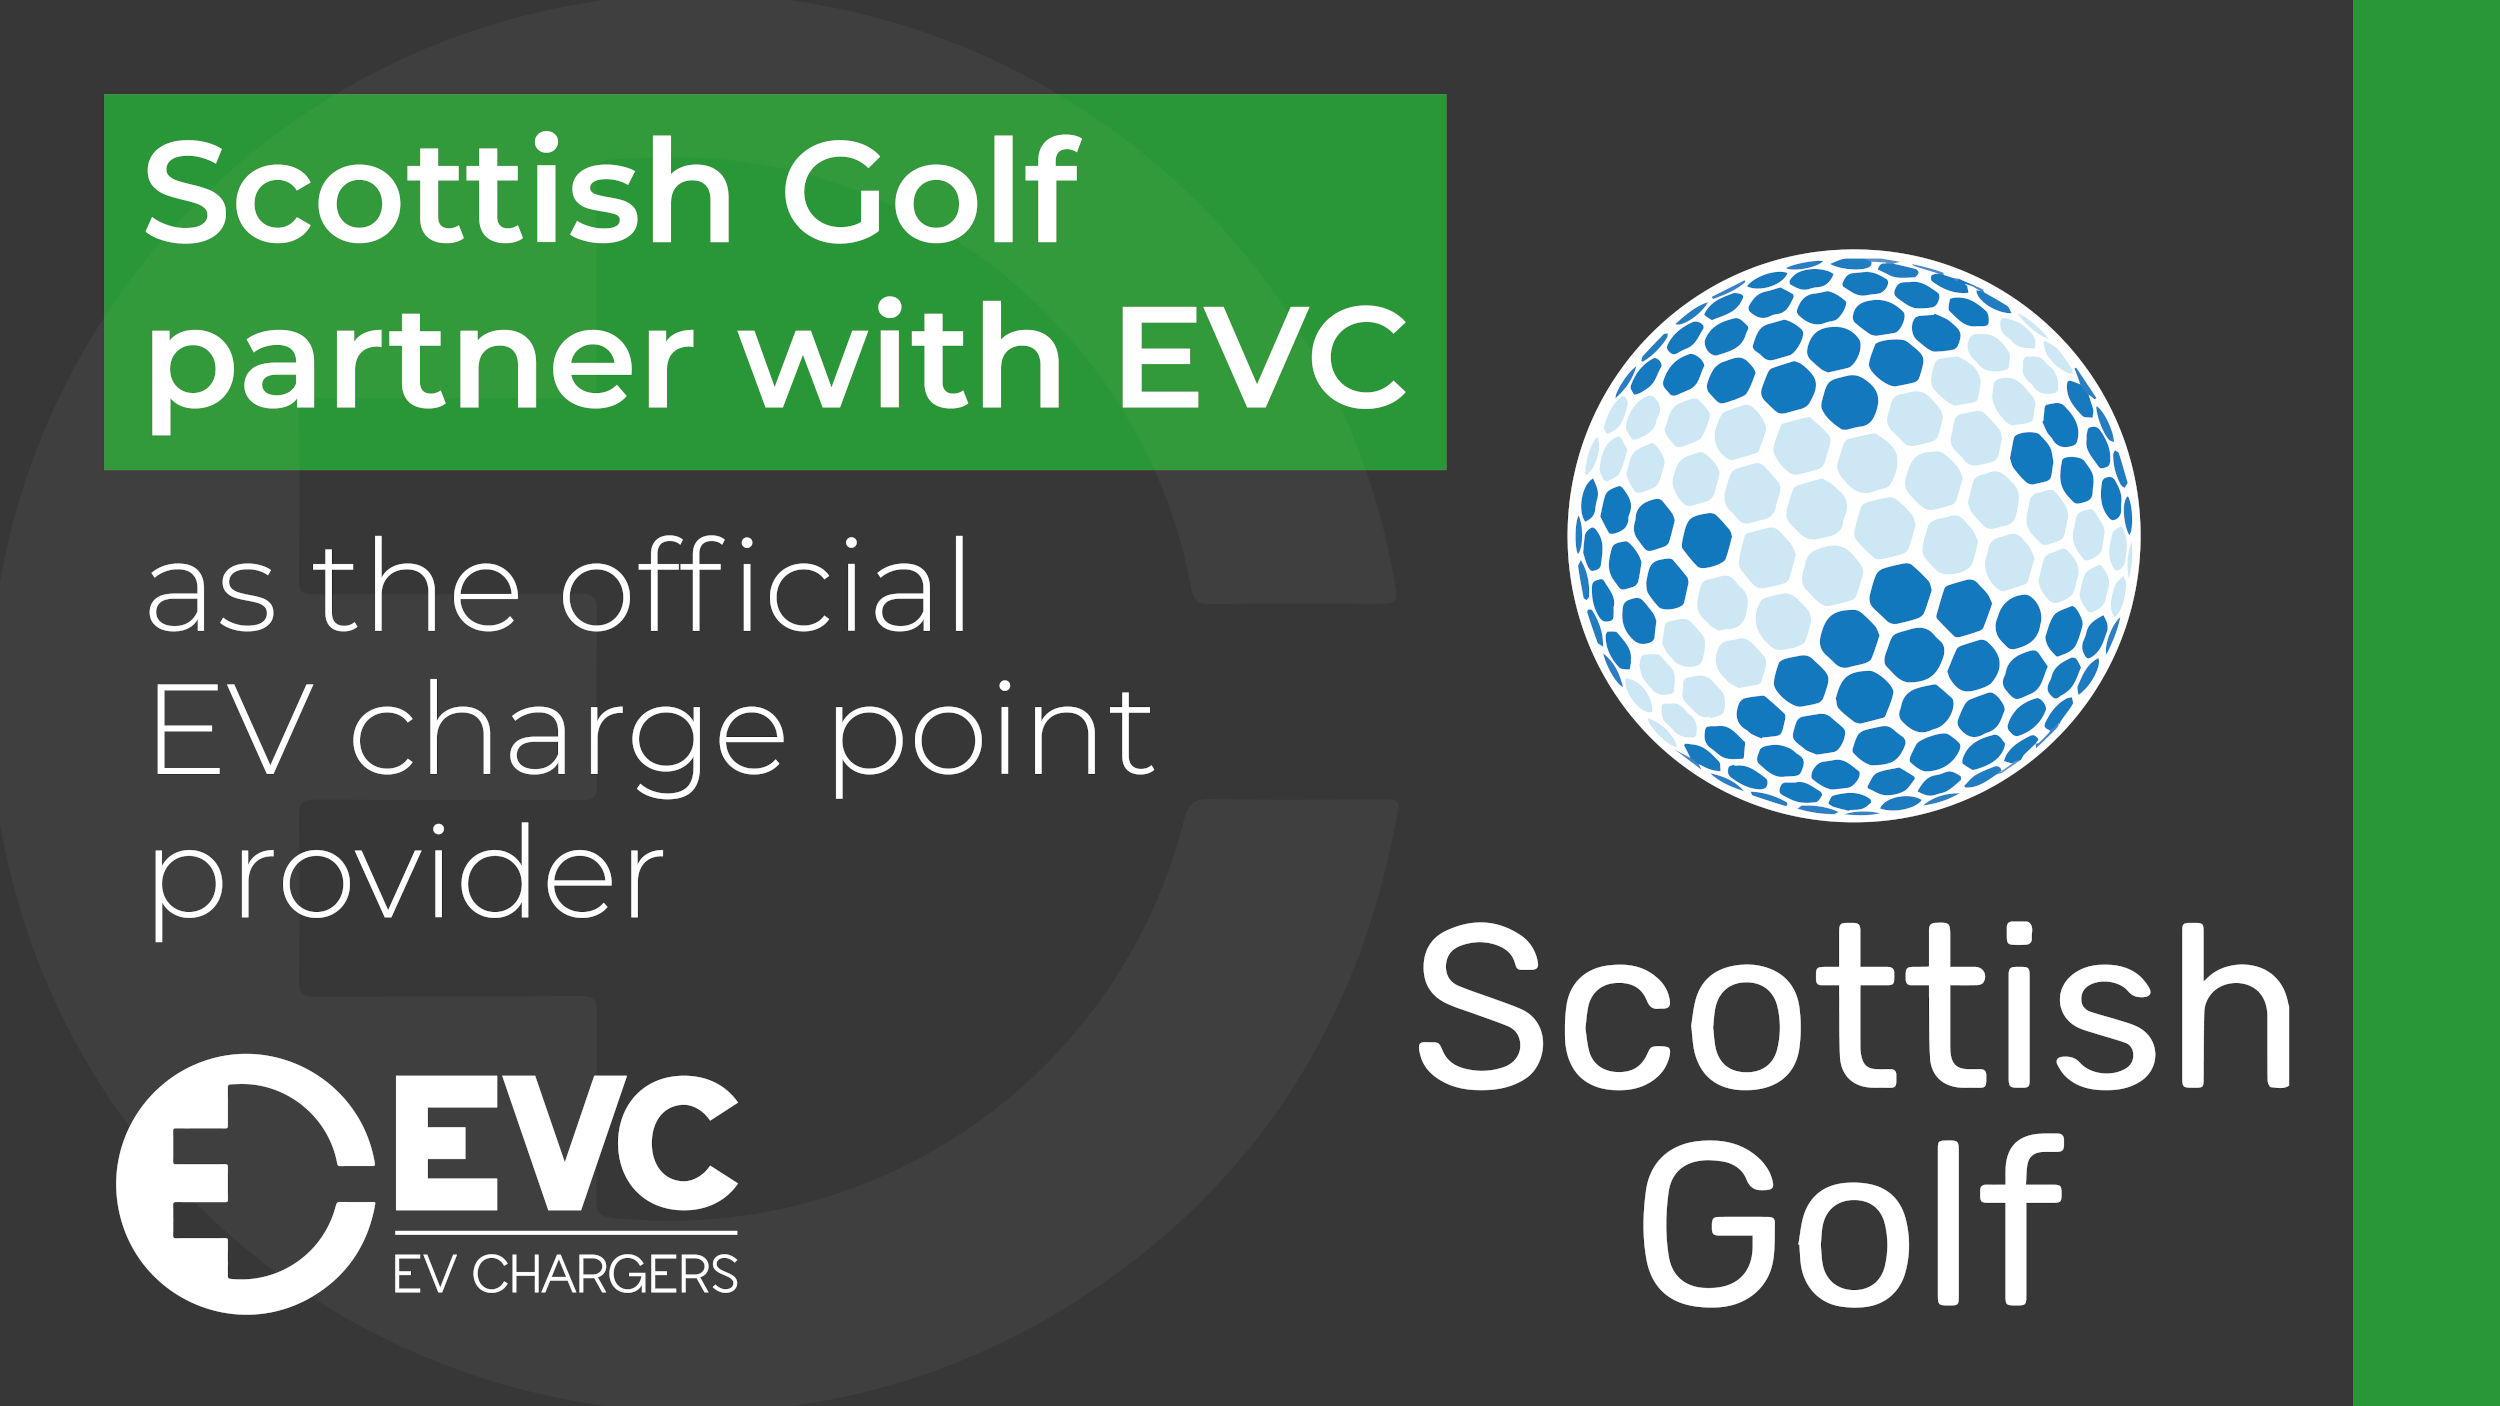 Scottish Golf partner with EVC as the official EV charge point provider